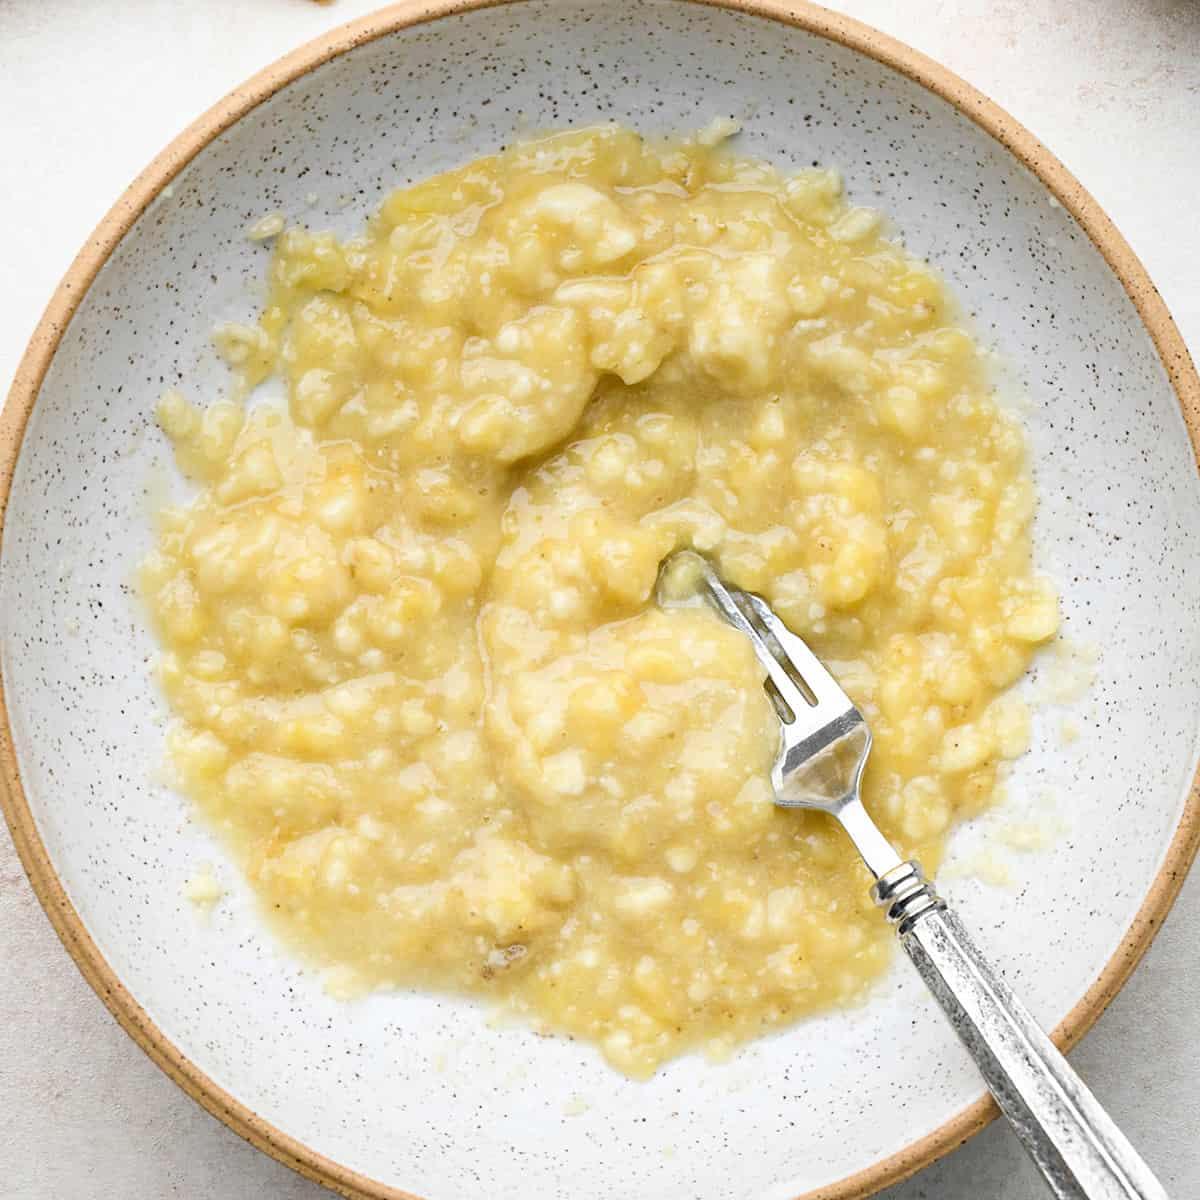 mashed banana in a bowl with a fork